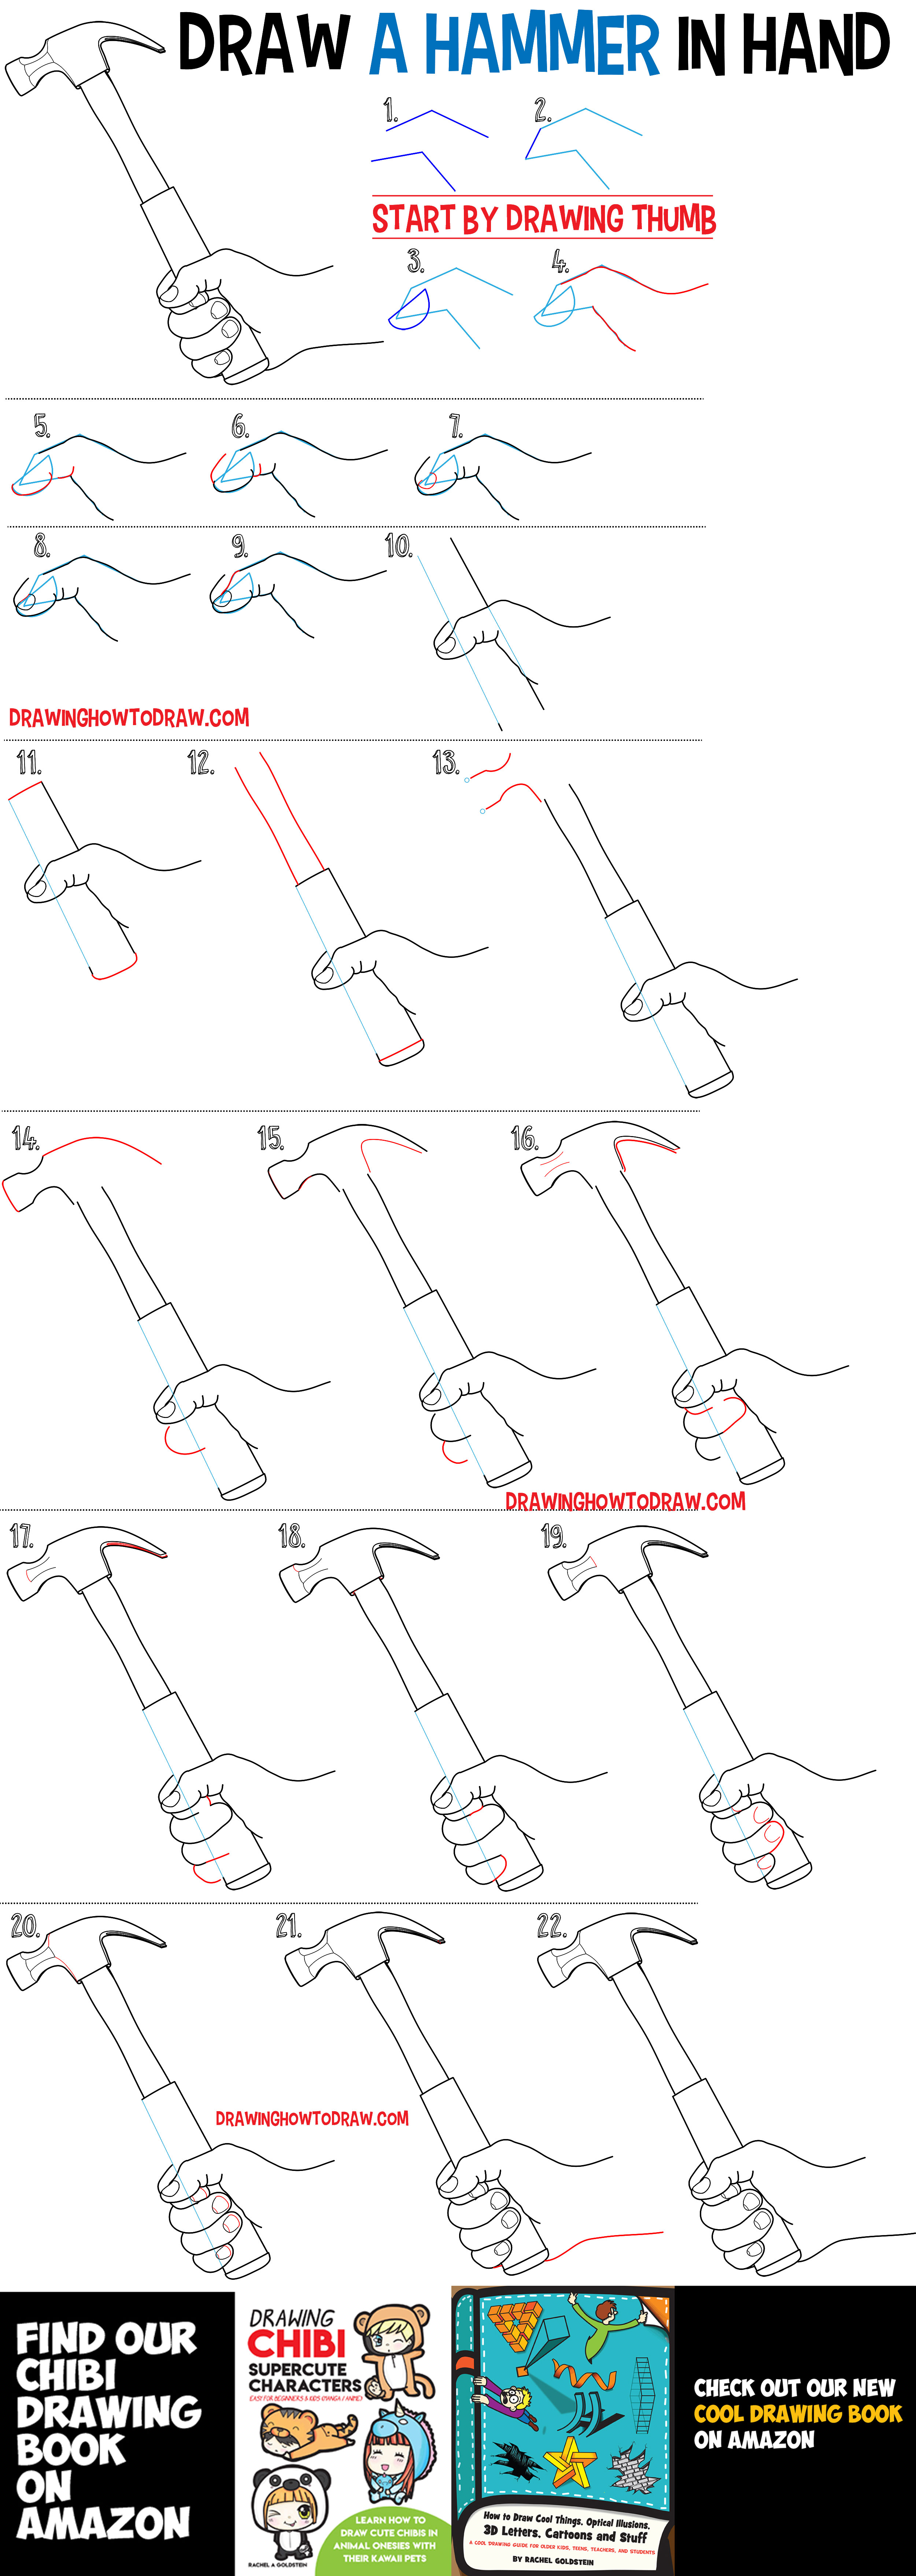 Learn How to Draw a Hand Holding a Hammer Easy Step by Step Drawing Tutorial for Beginners